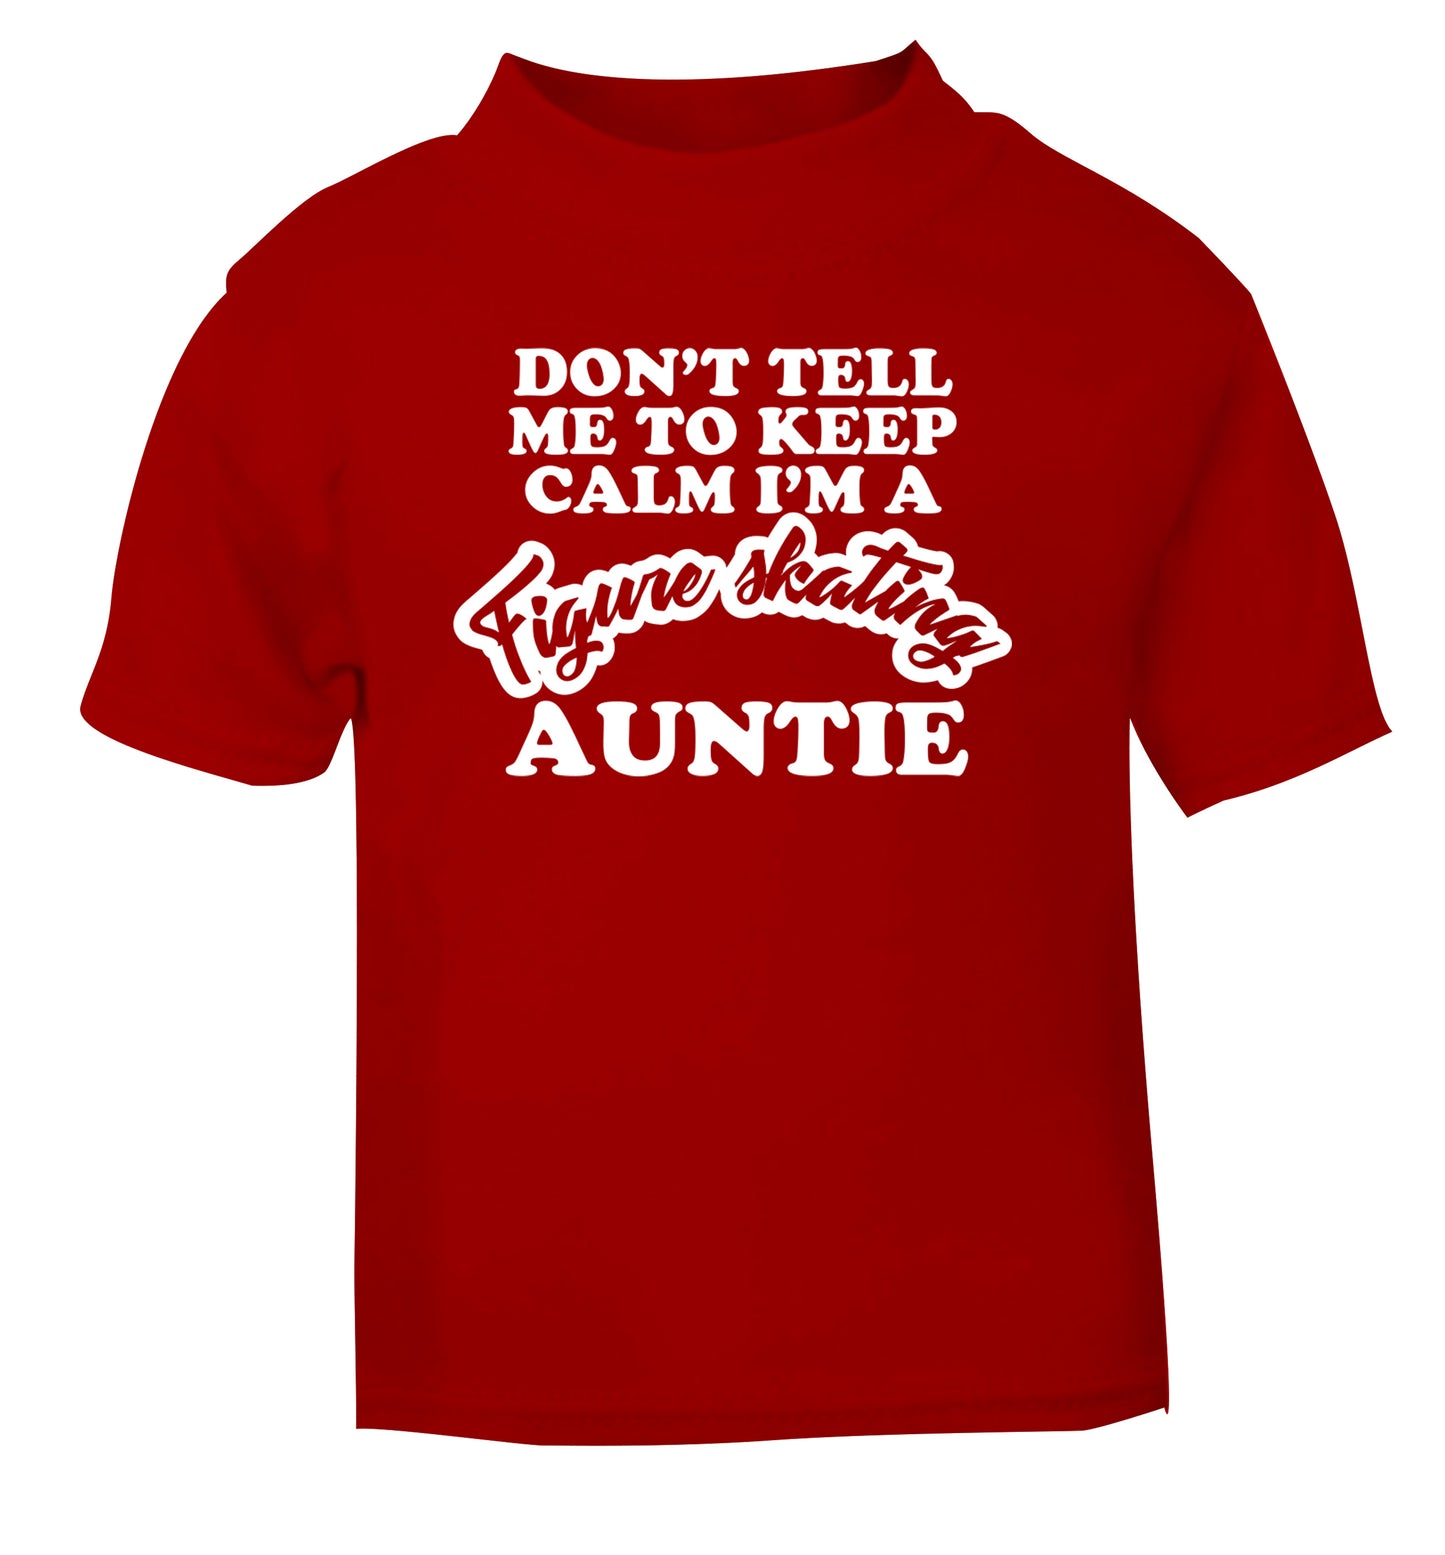 Don't tell me to keep calm I'm a figure skating auntie red Baby Toddler Tshirt 2 Years